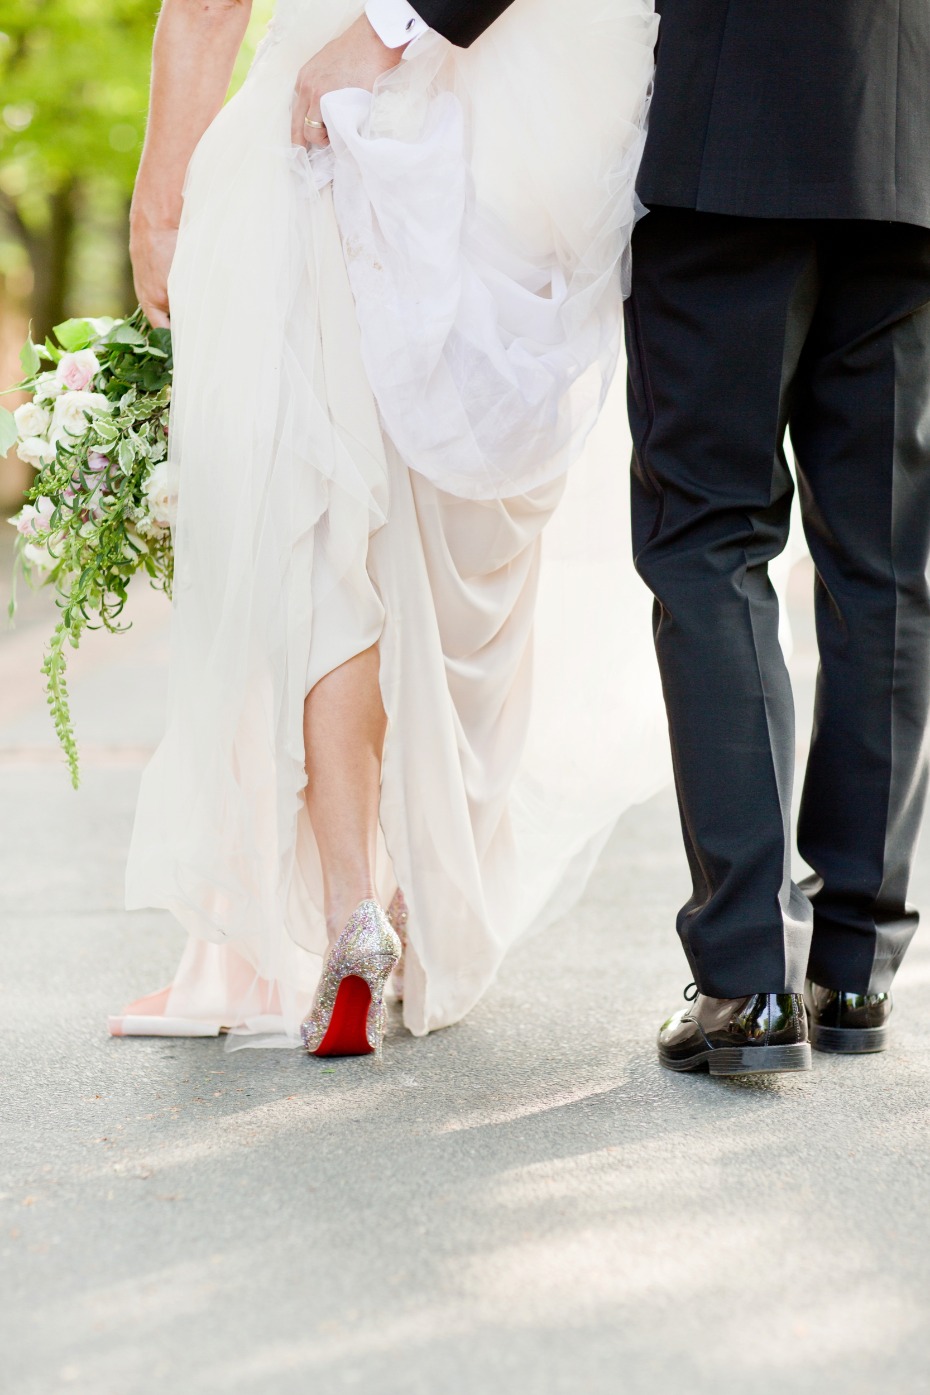 Louboutin heels for the bride